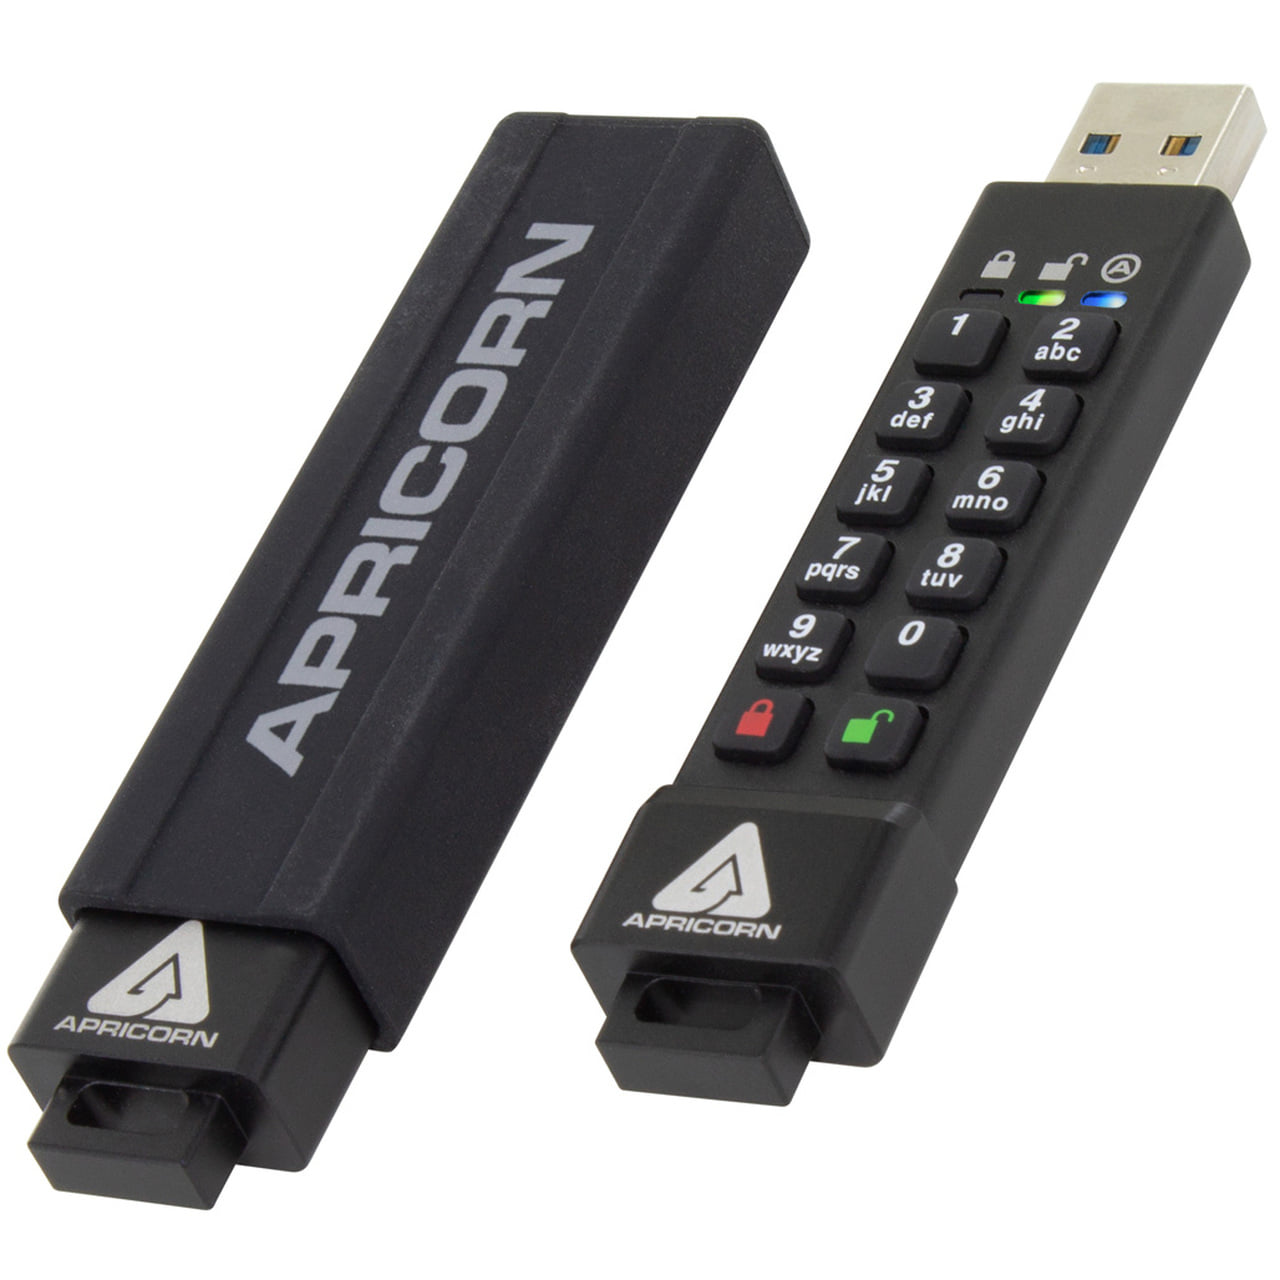 Apricorn pendrive supported by Hard Disk Sentinel